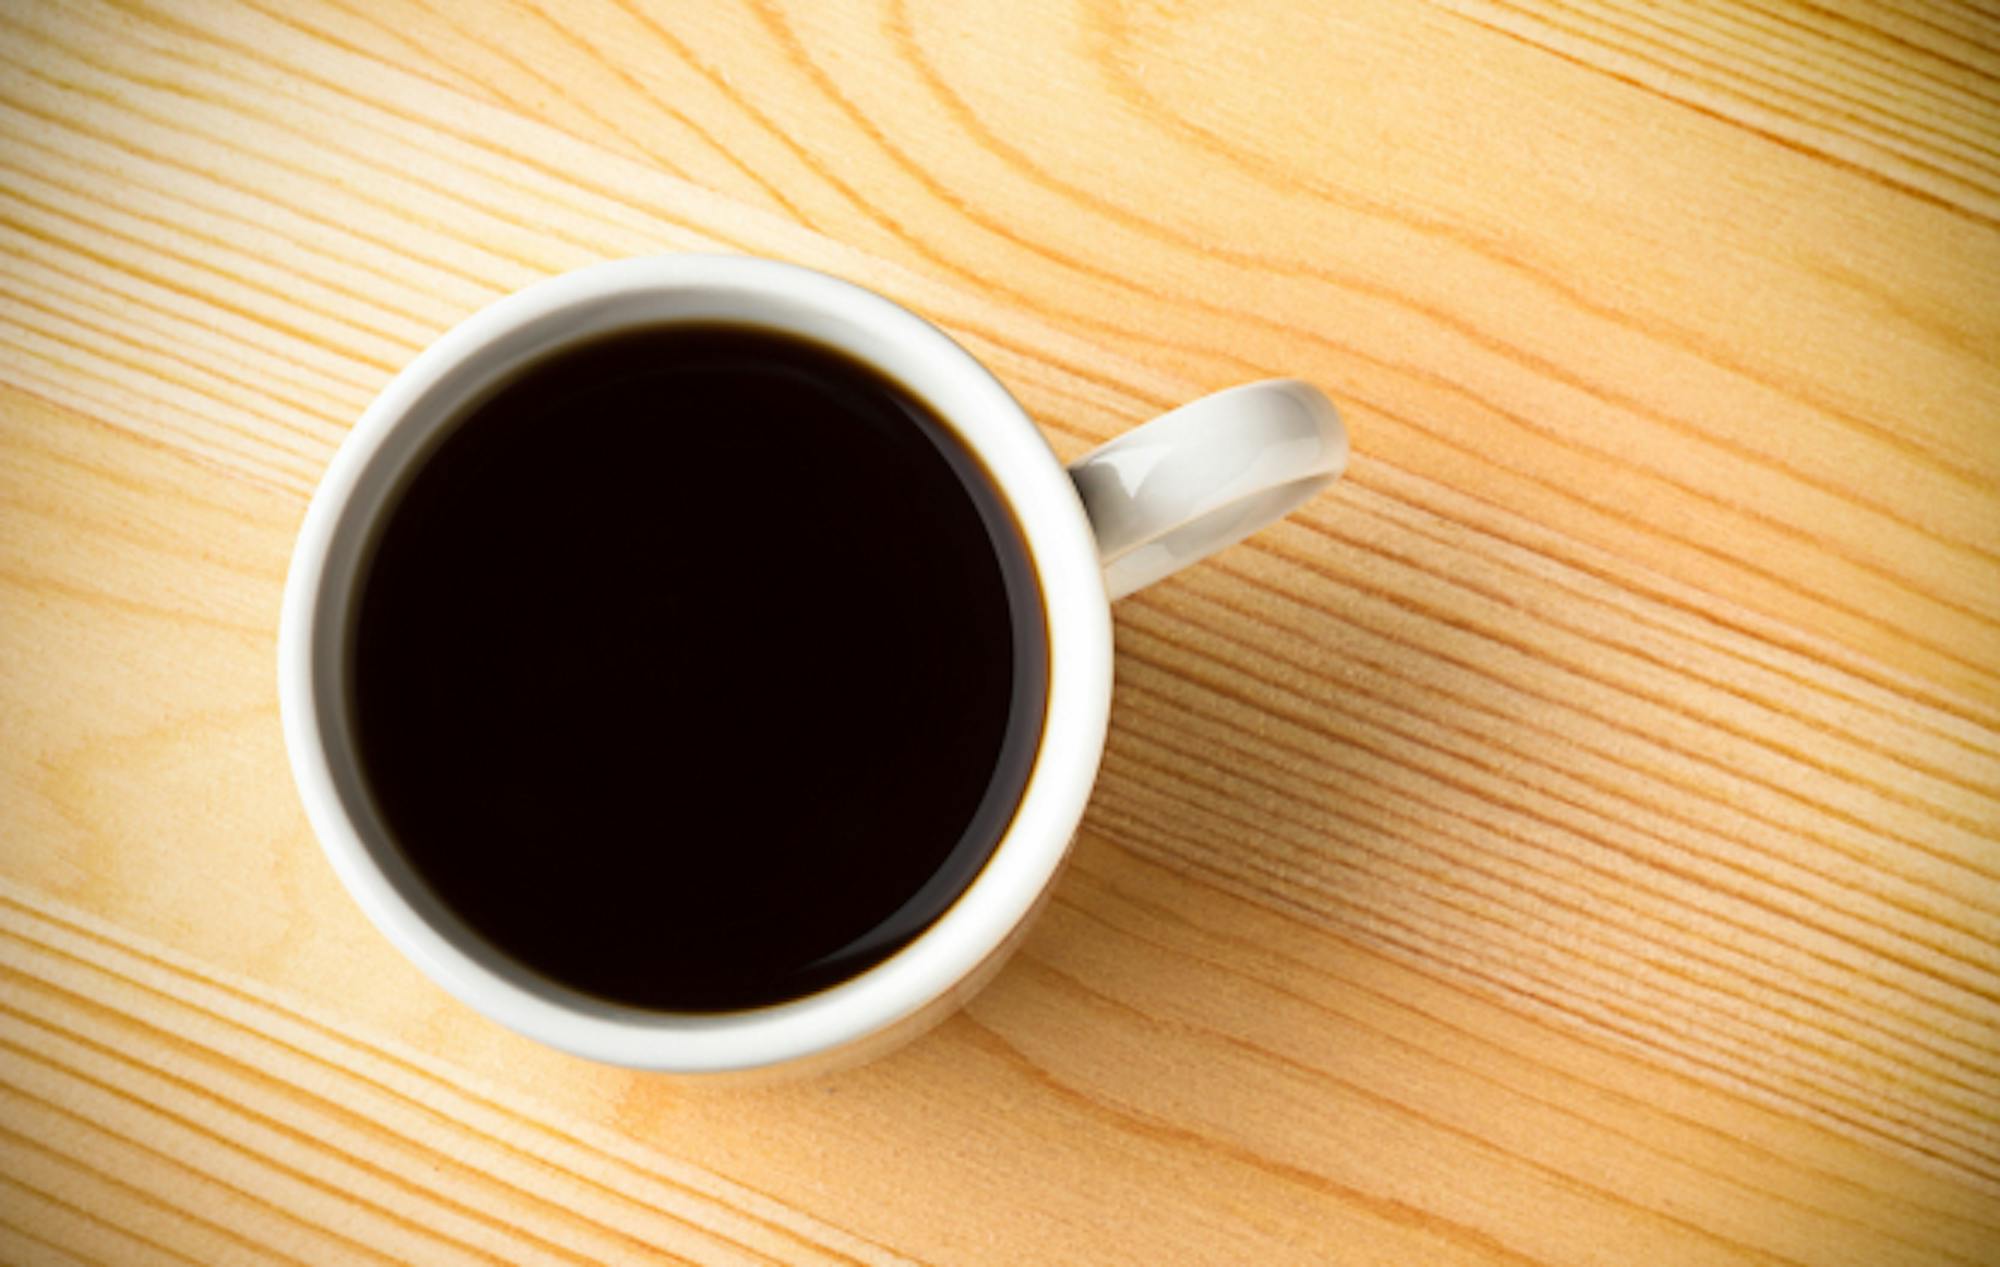 A cup of black coffee on a wooden surface